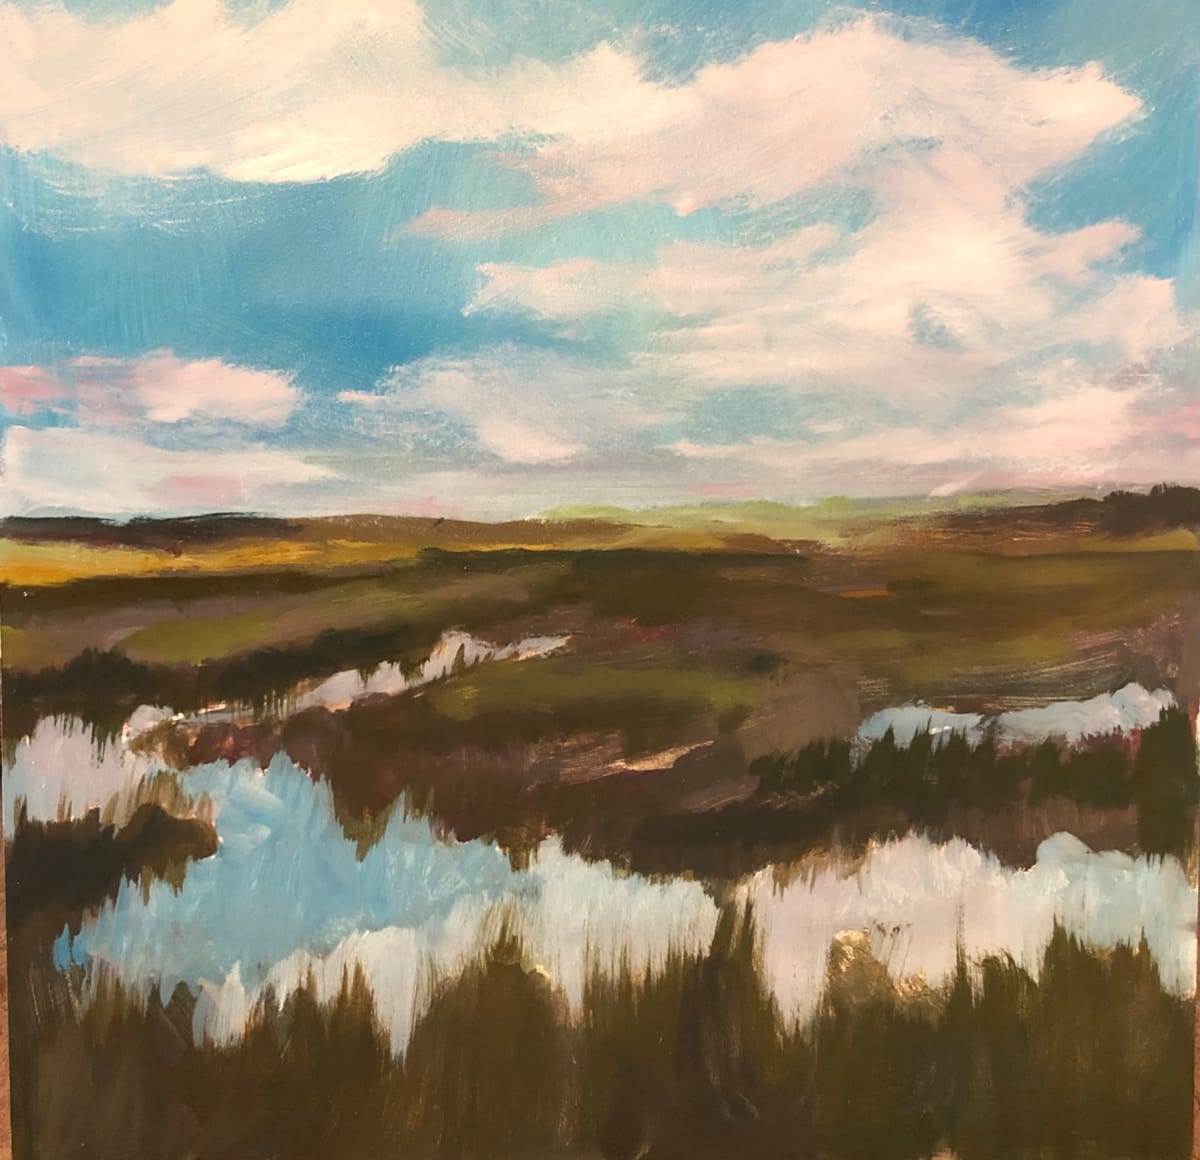 small scape-low country #11 by Rebecca Jacob  Image: Scape Sketch Collection-special places on my journey of life

scape sketch-low country #11

6x6 oil on ampersand museum gesso panel 2022

This painting was inspired by the views of the marshlands in the low country of South Carolina.